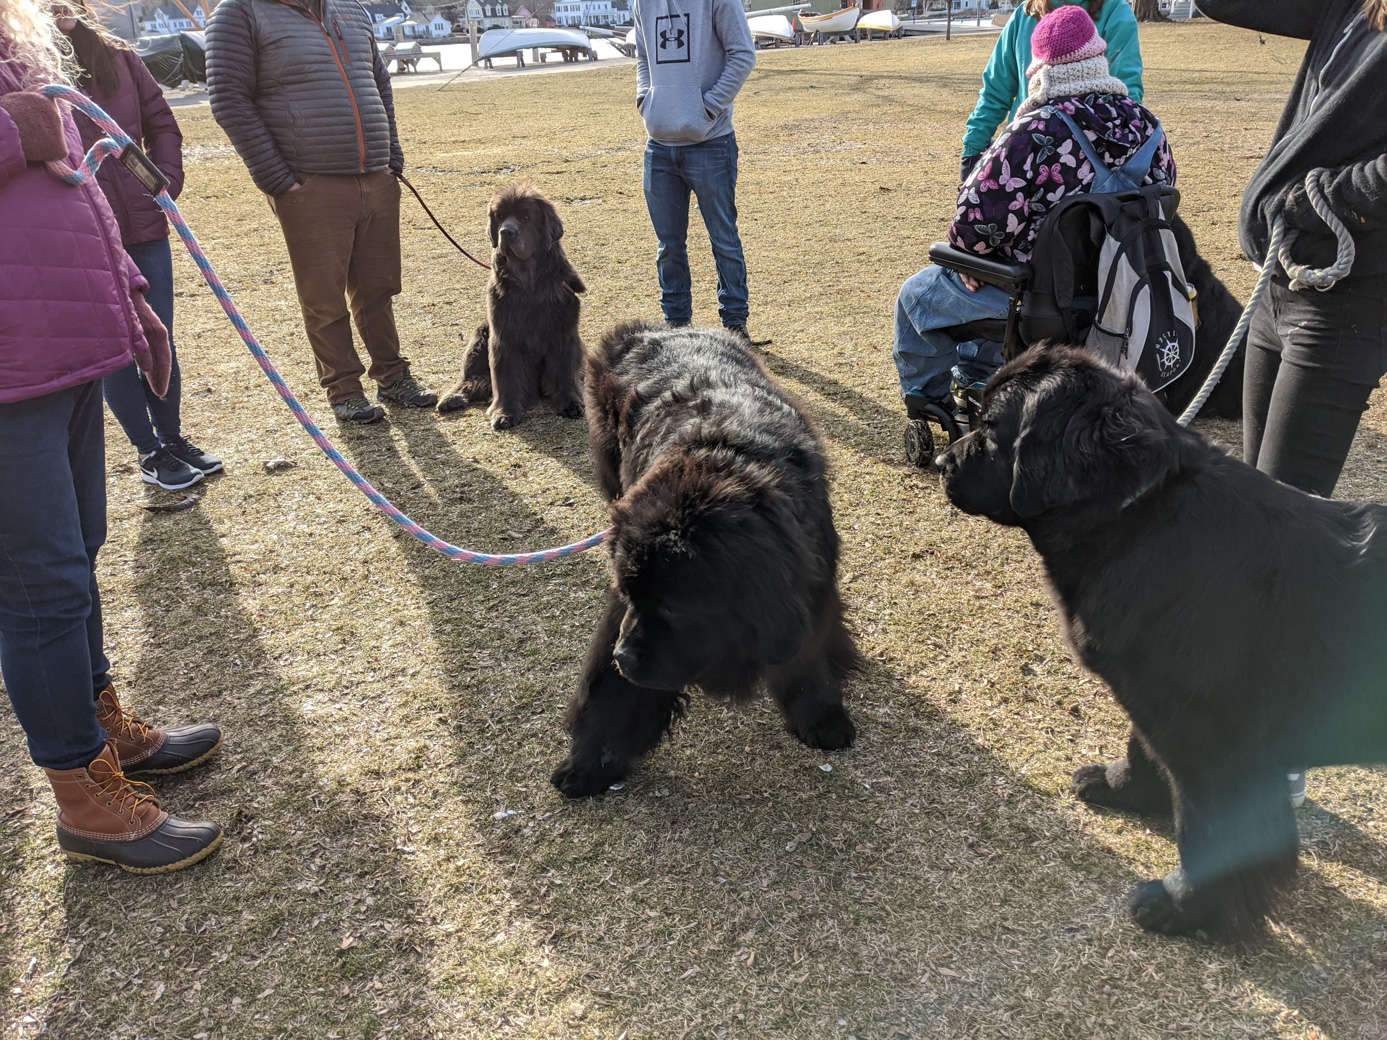 Newfoundland dogs at the Mystic Seaport Museum